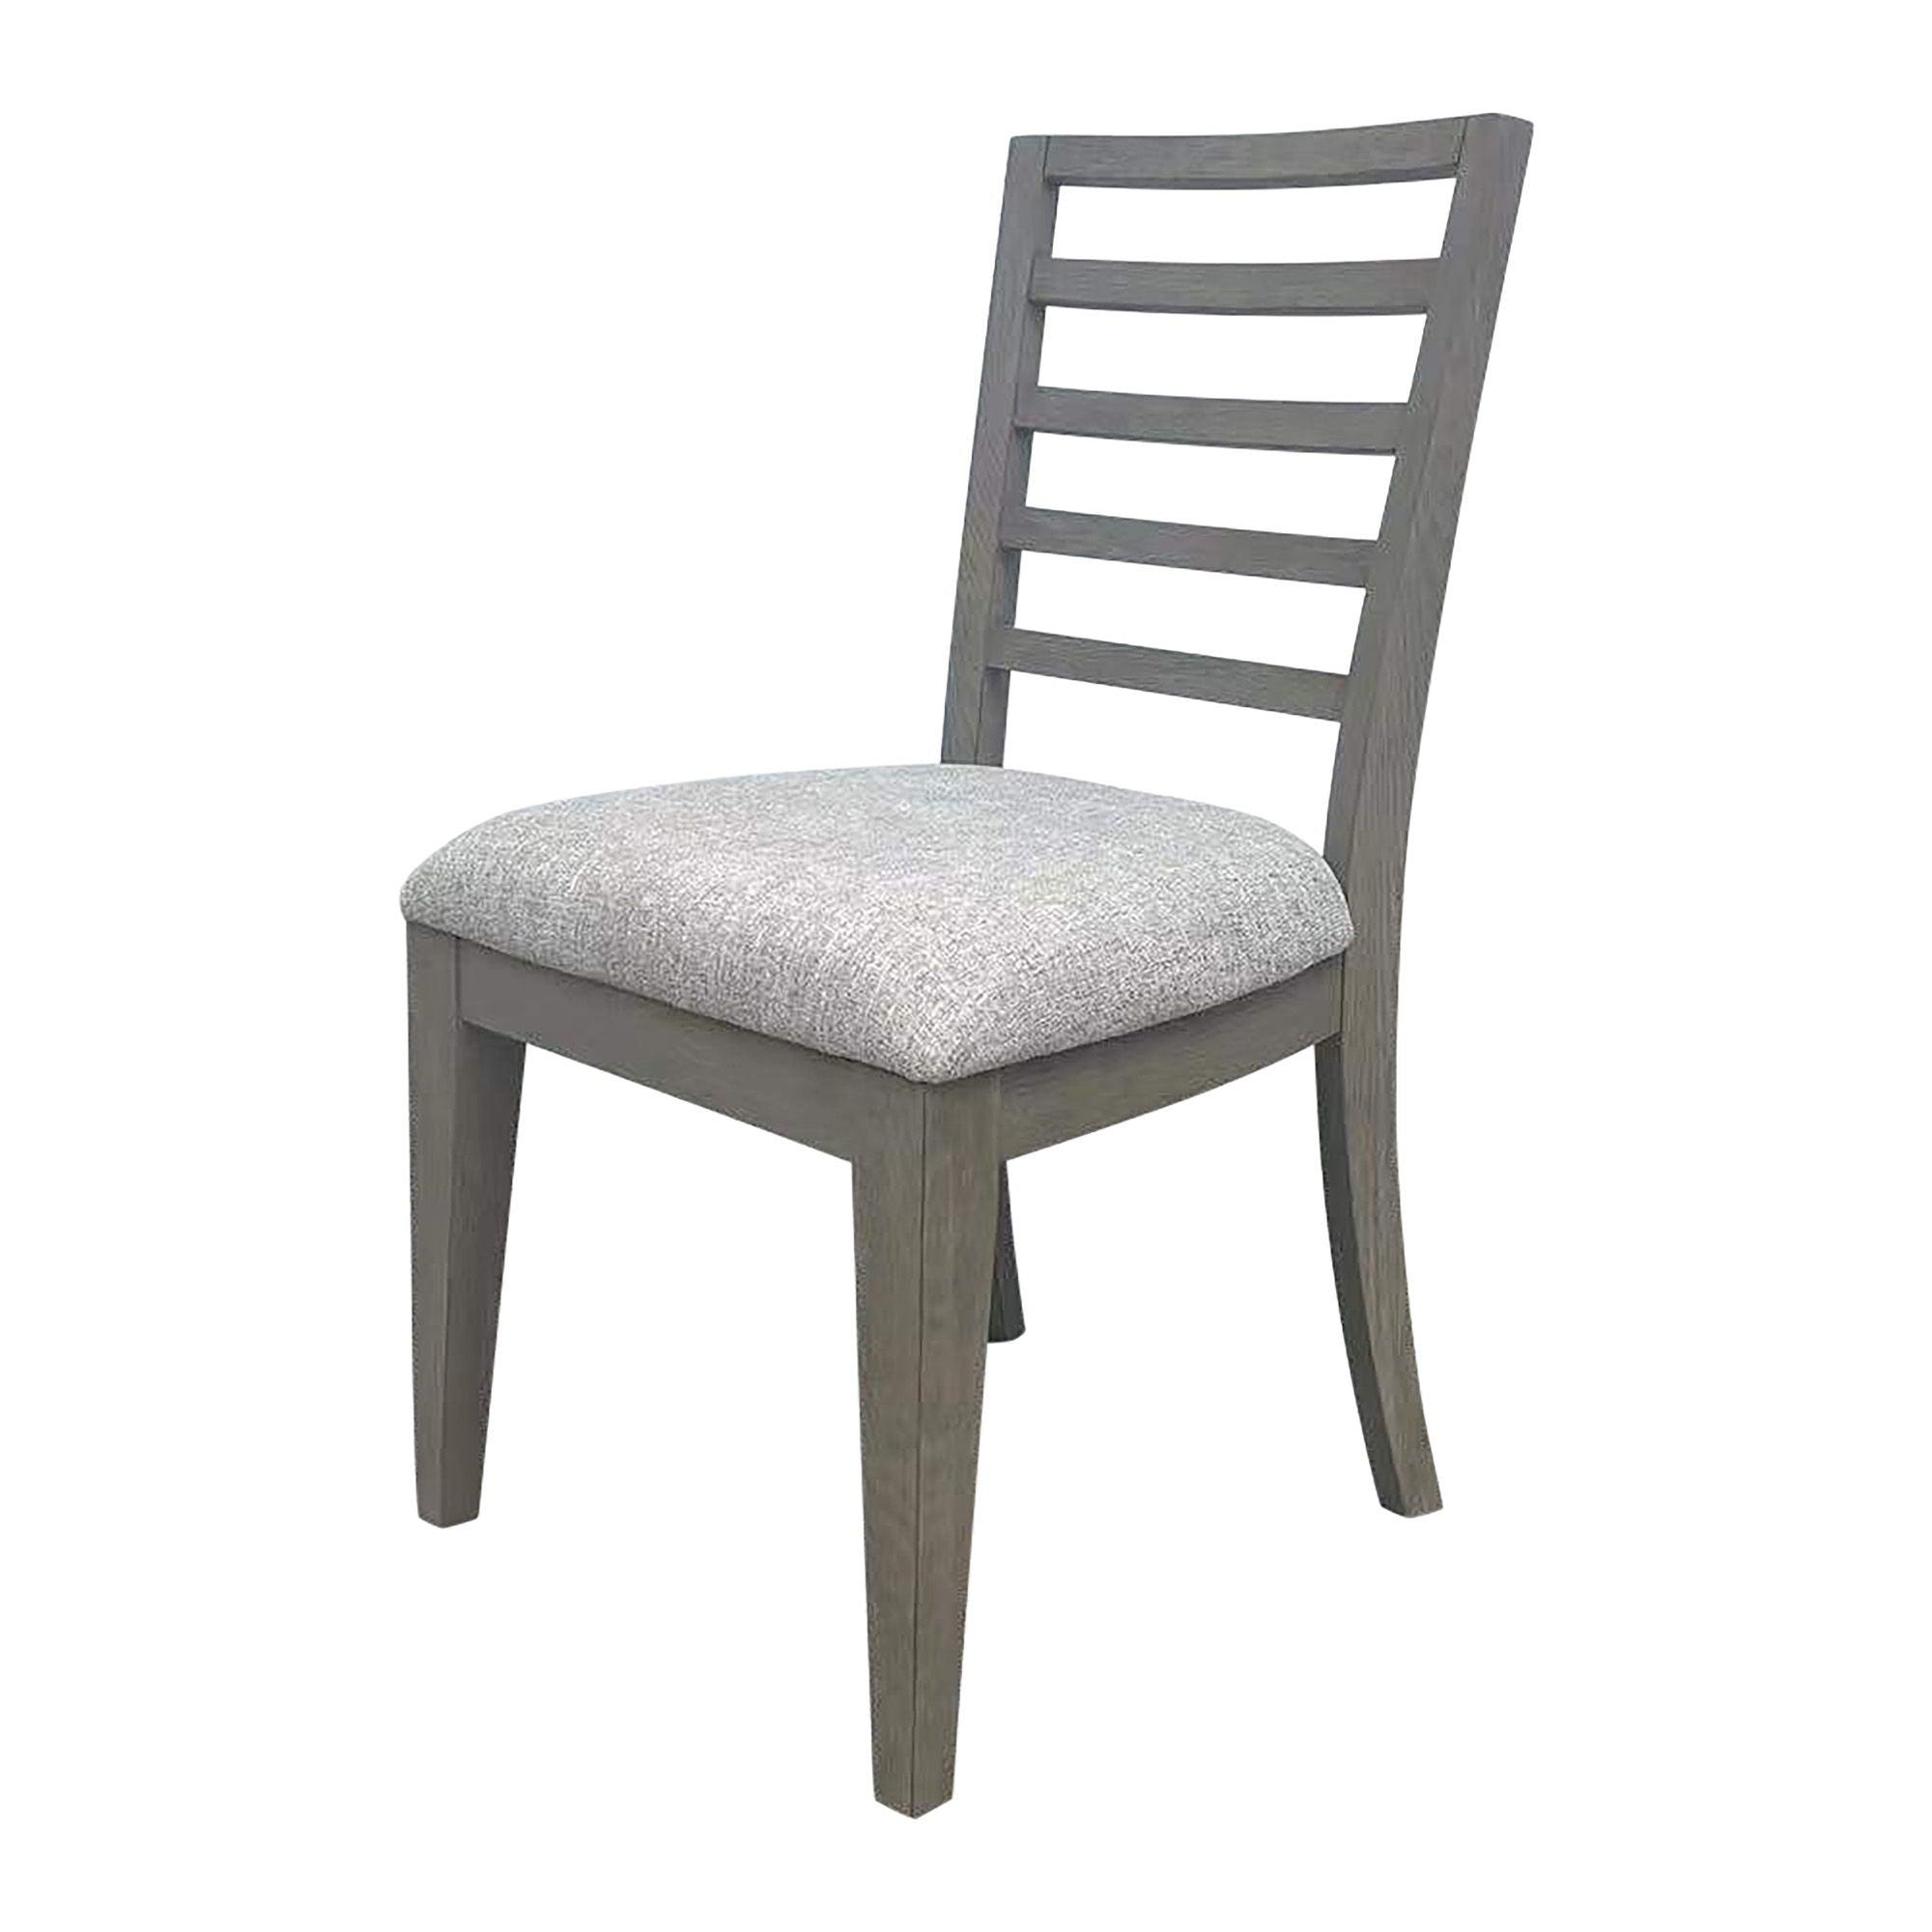 Parker House - Pure Modern Dining - Ladderback Chair - Moonstone - 5th Avenue Furniture